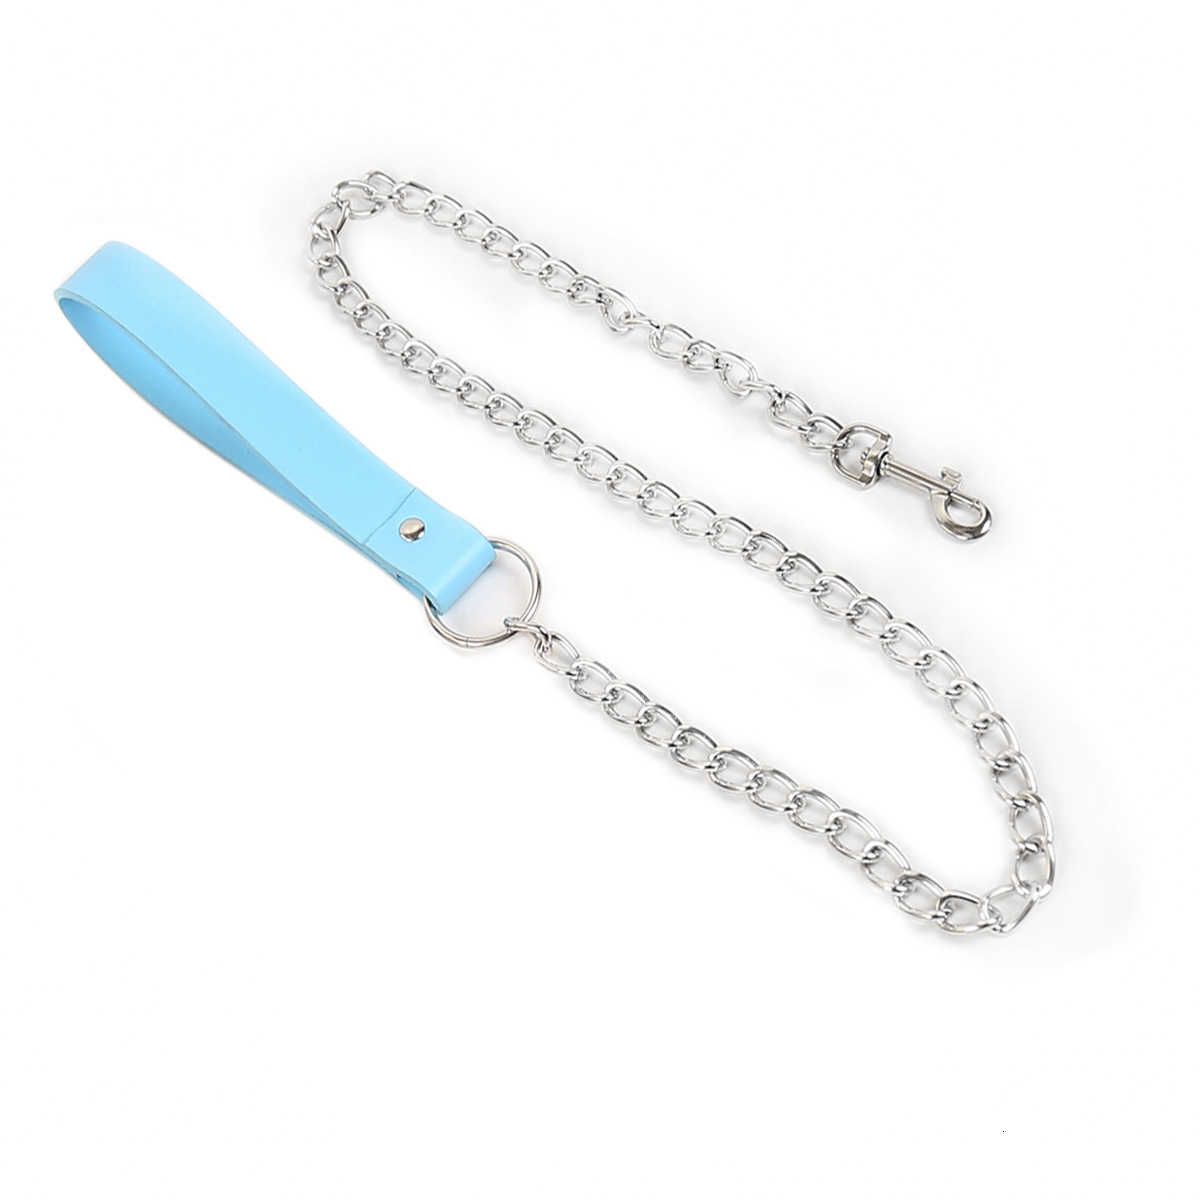 Sky Blue Leather Chain Traction